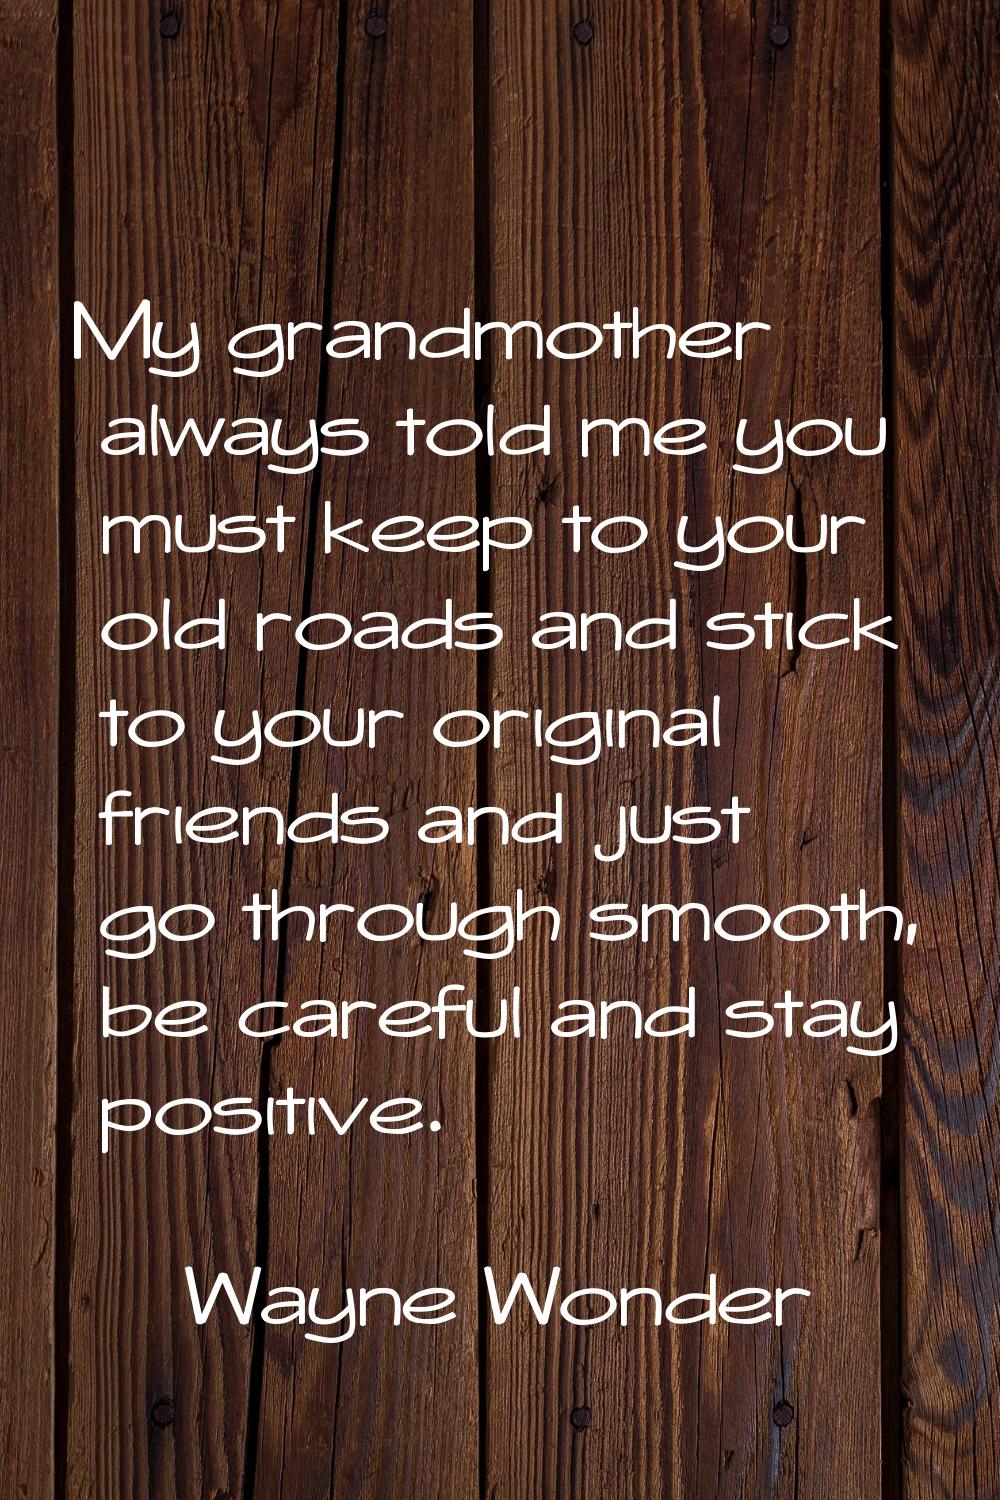 My grandmother always told me you must keep to your old roads and stick to your original friends an